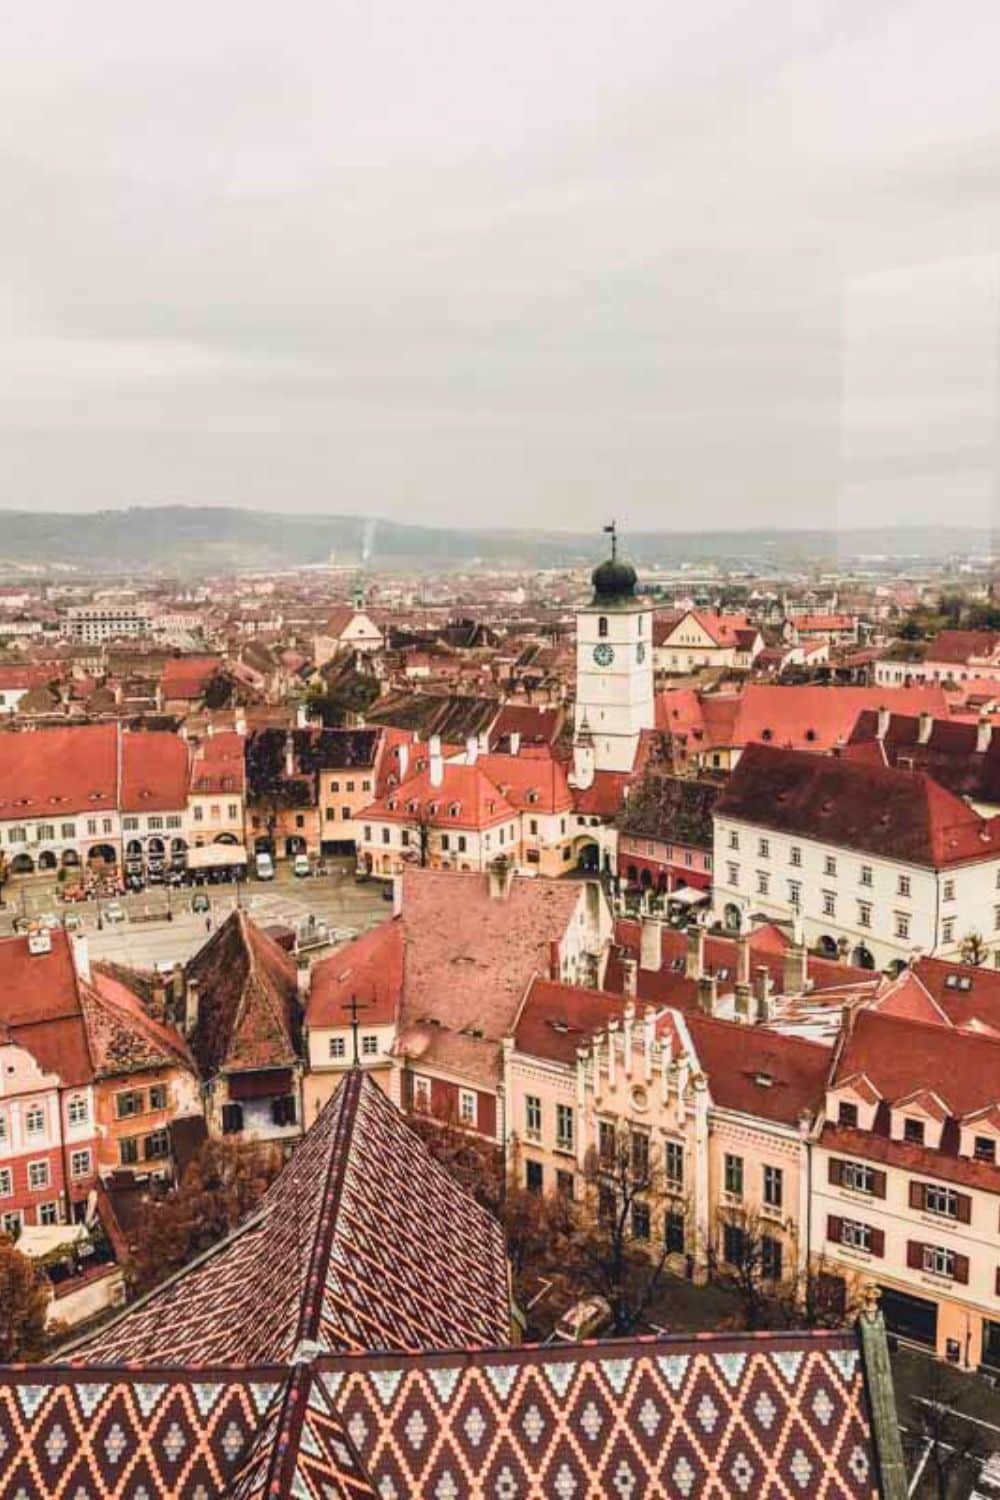 Panoramic view of Sibiu from above, with the iconic Council Tower amidst red roofs, demonstrating the picturesque beauty that answers yes to whether Sibiu is worth visiting